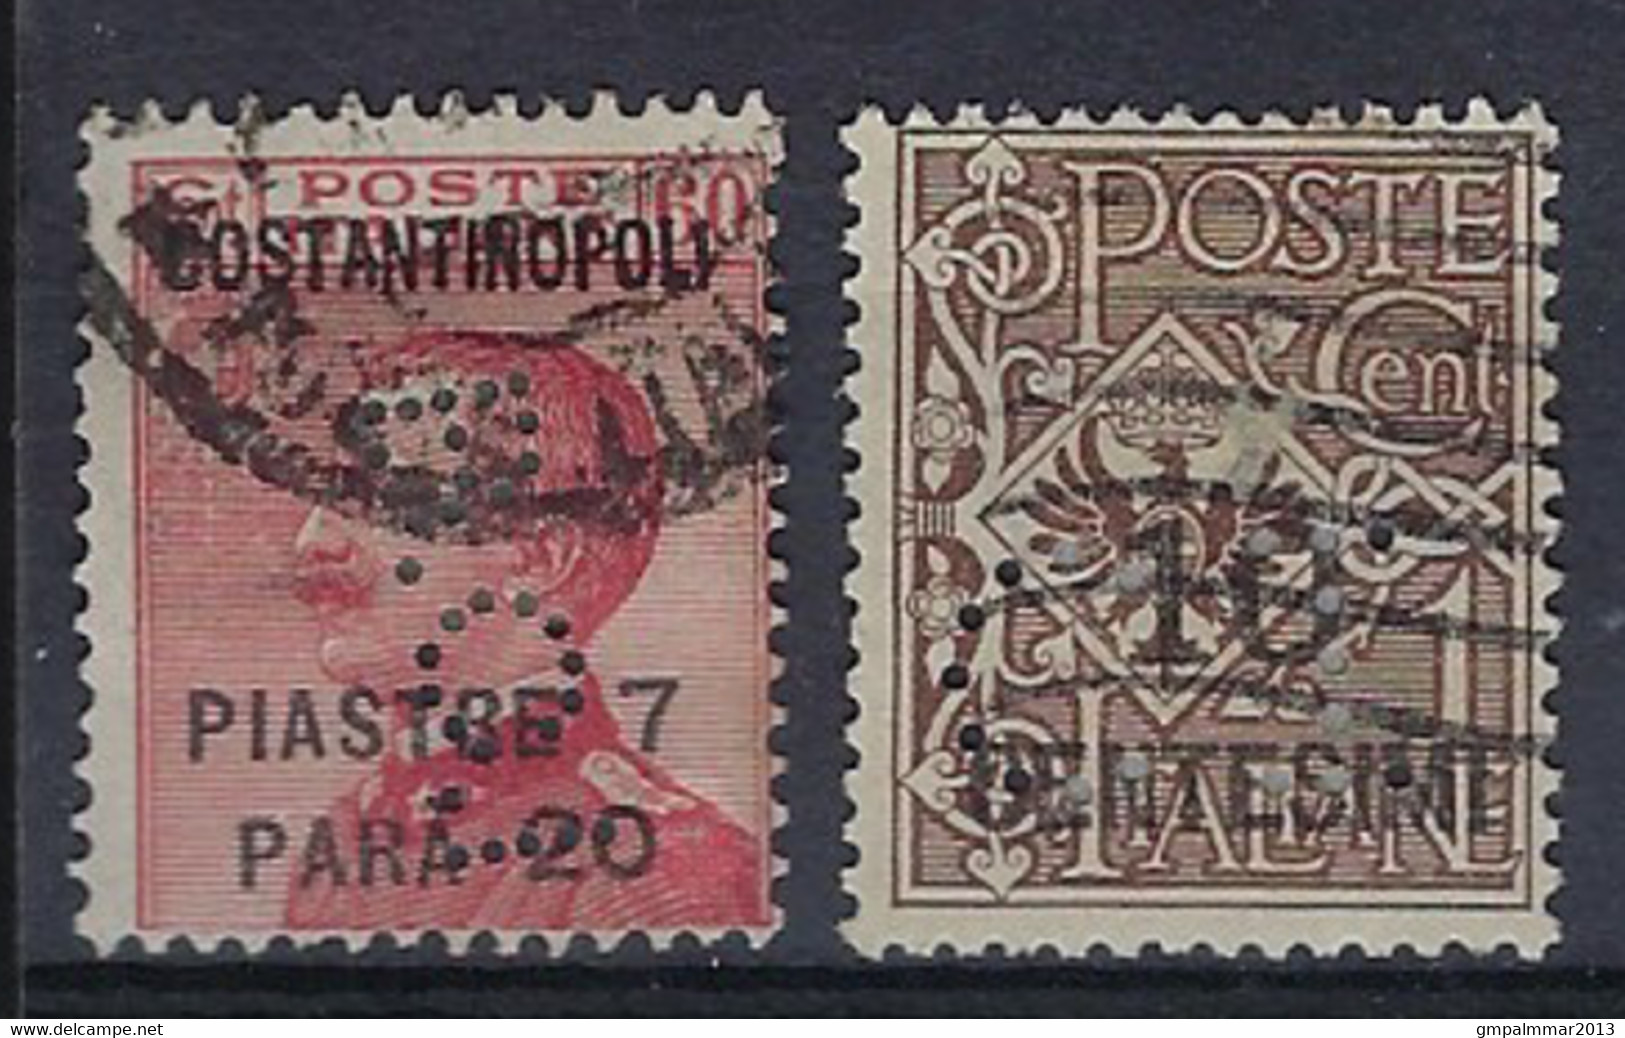 PERFIN / PERFO / LOCHUNG 2 Stamps , 1 X LEVANT / LEVANTE  ITALY OFFICE CONSTANTINOPOLI  ; 2 Scans ! LOT 207 - Non Classés